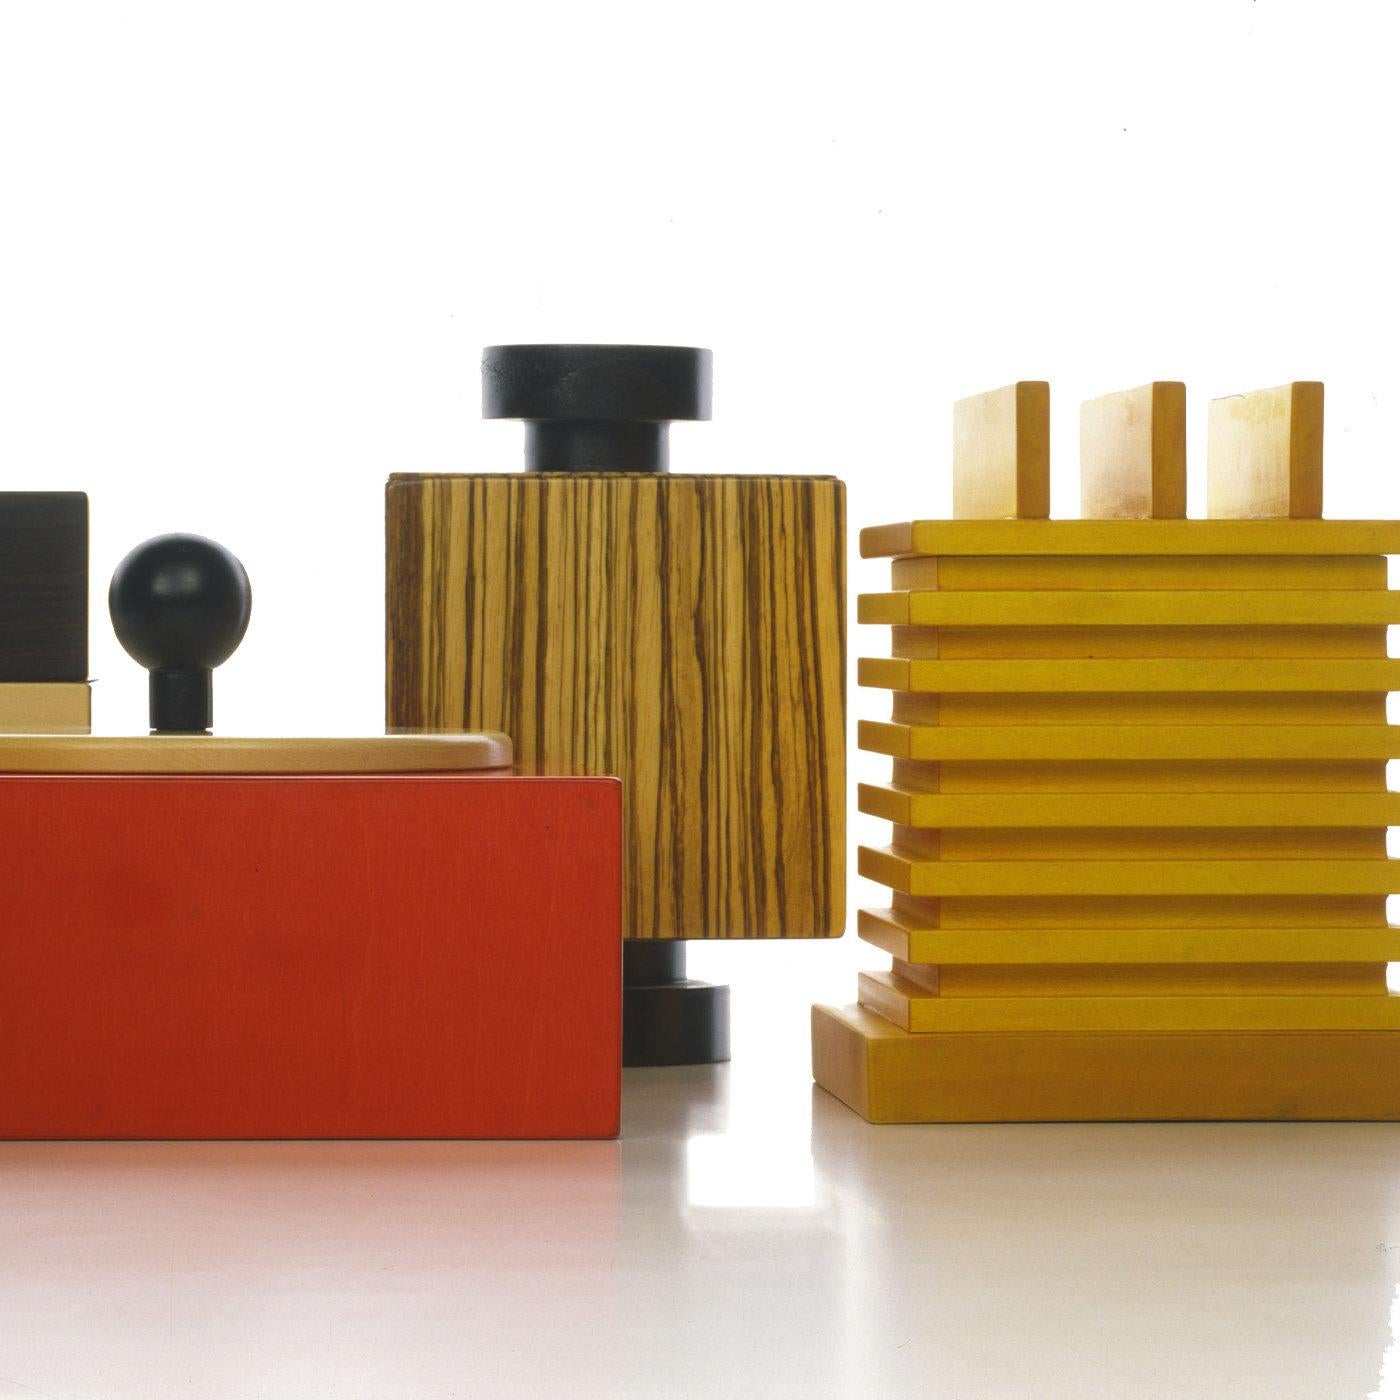 A sculptural piece of strong architectural allure, this box is an exclusive design by Ettore Sottsass produced in a limited edition of 99 pieces. Reminiscent of a modern city building, it is entirely crafted of solid maple wood with a